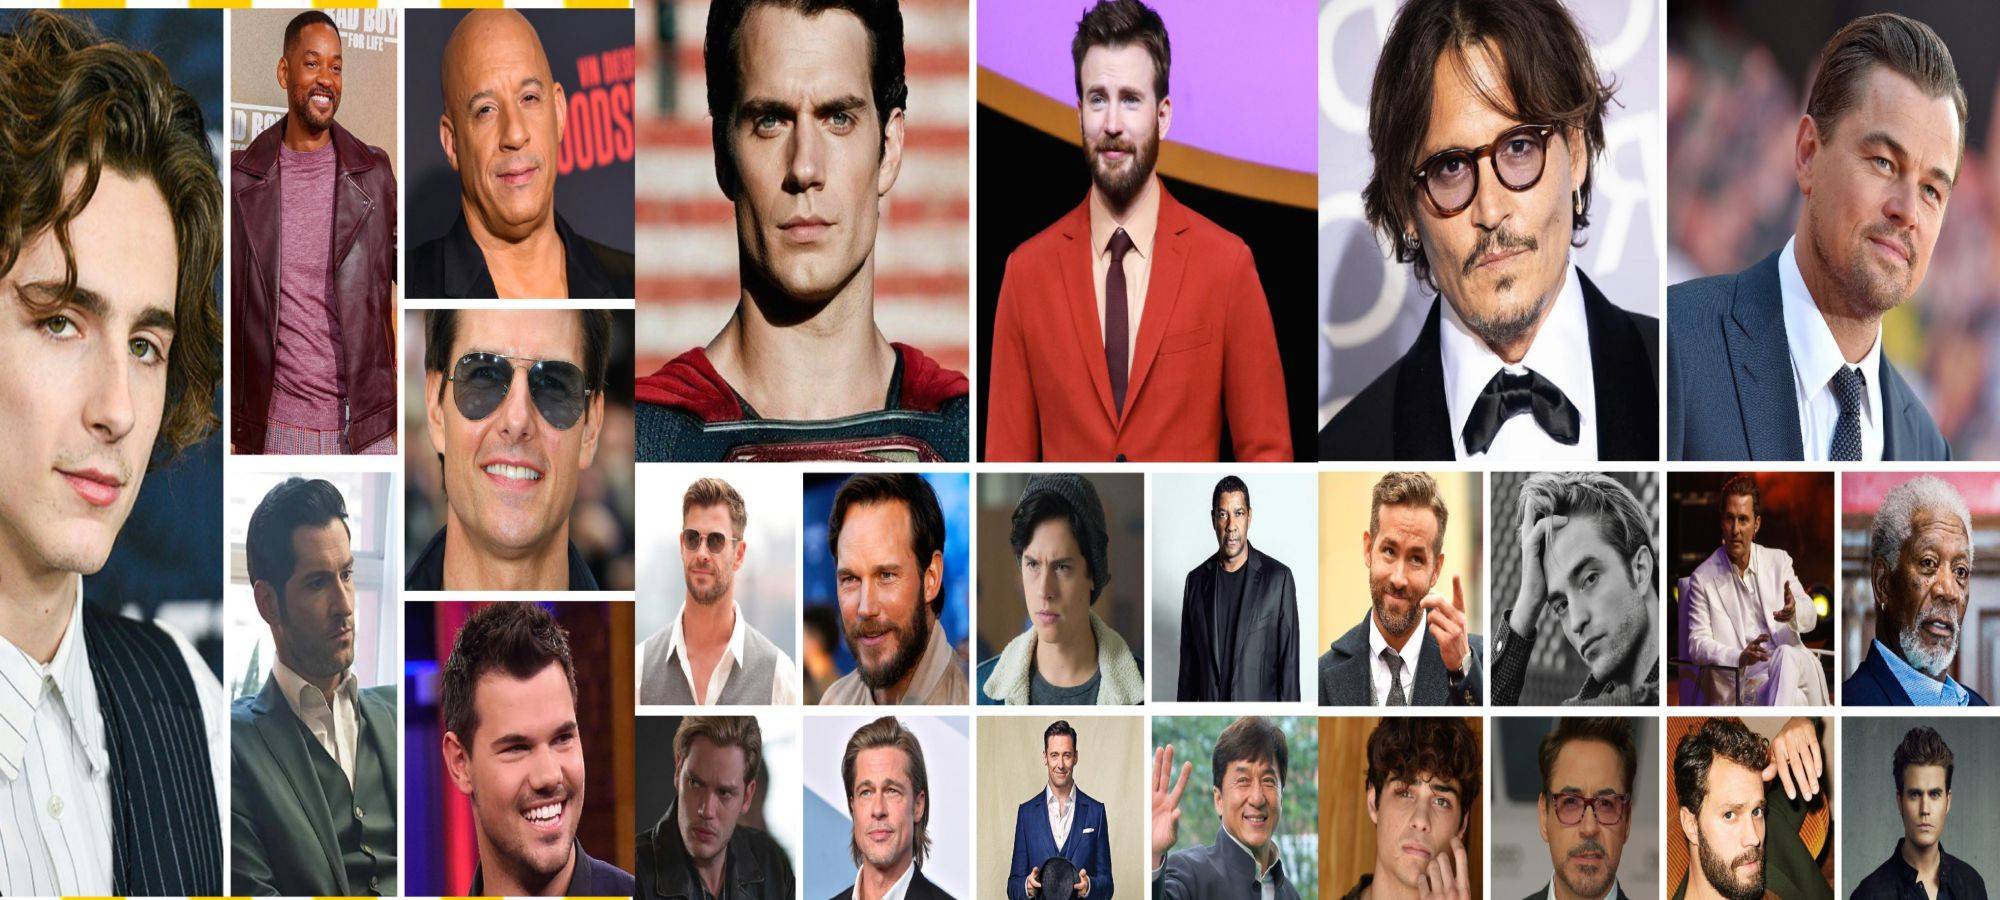 Top 25 Hollywood Actors and Their Mini-Biography | ShowBizClan